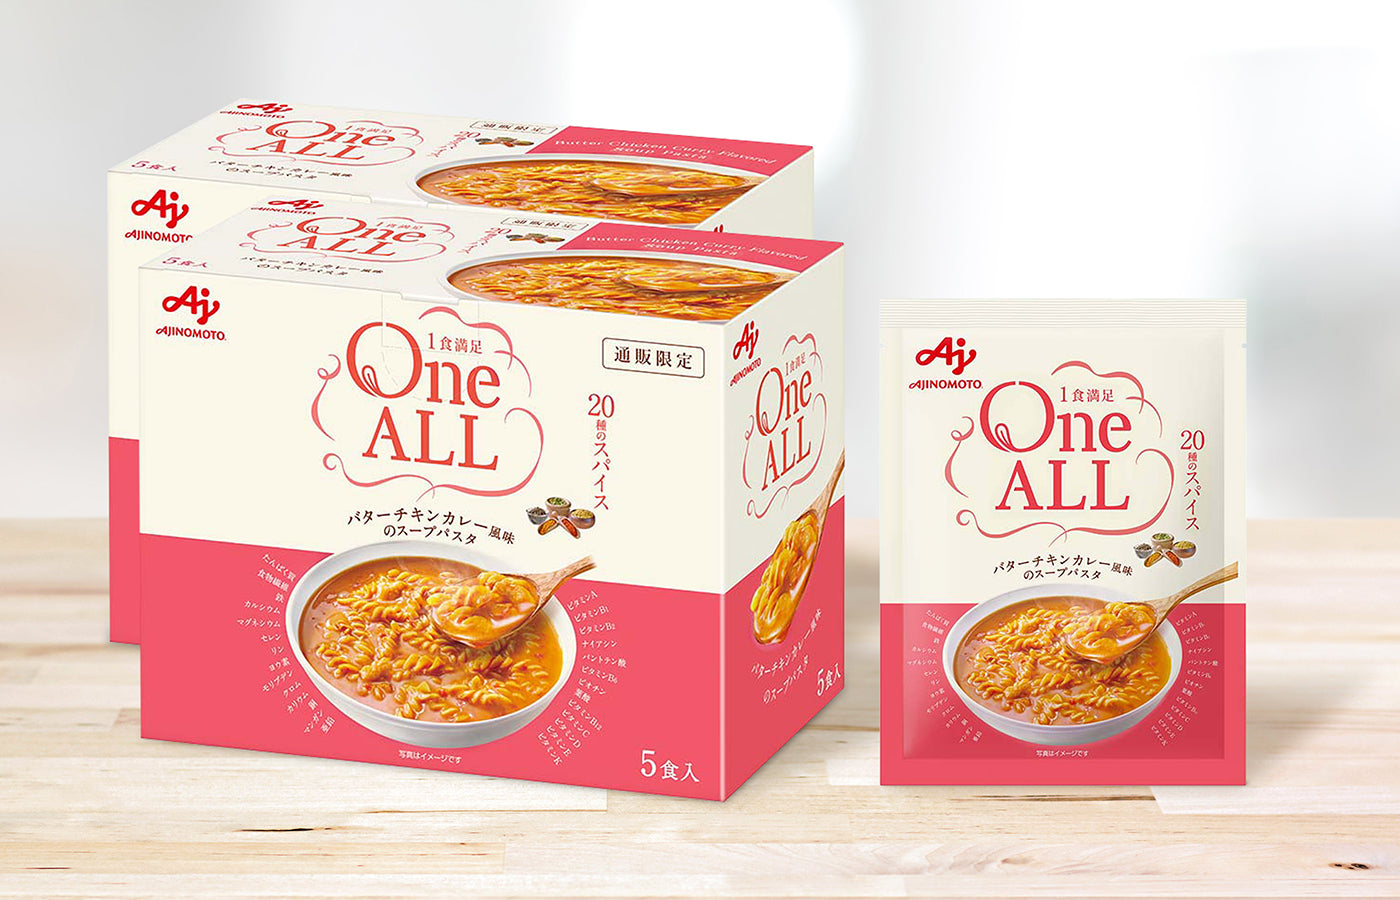 「One ALL」１０食入＜バターチキンカレー風味＞